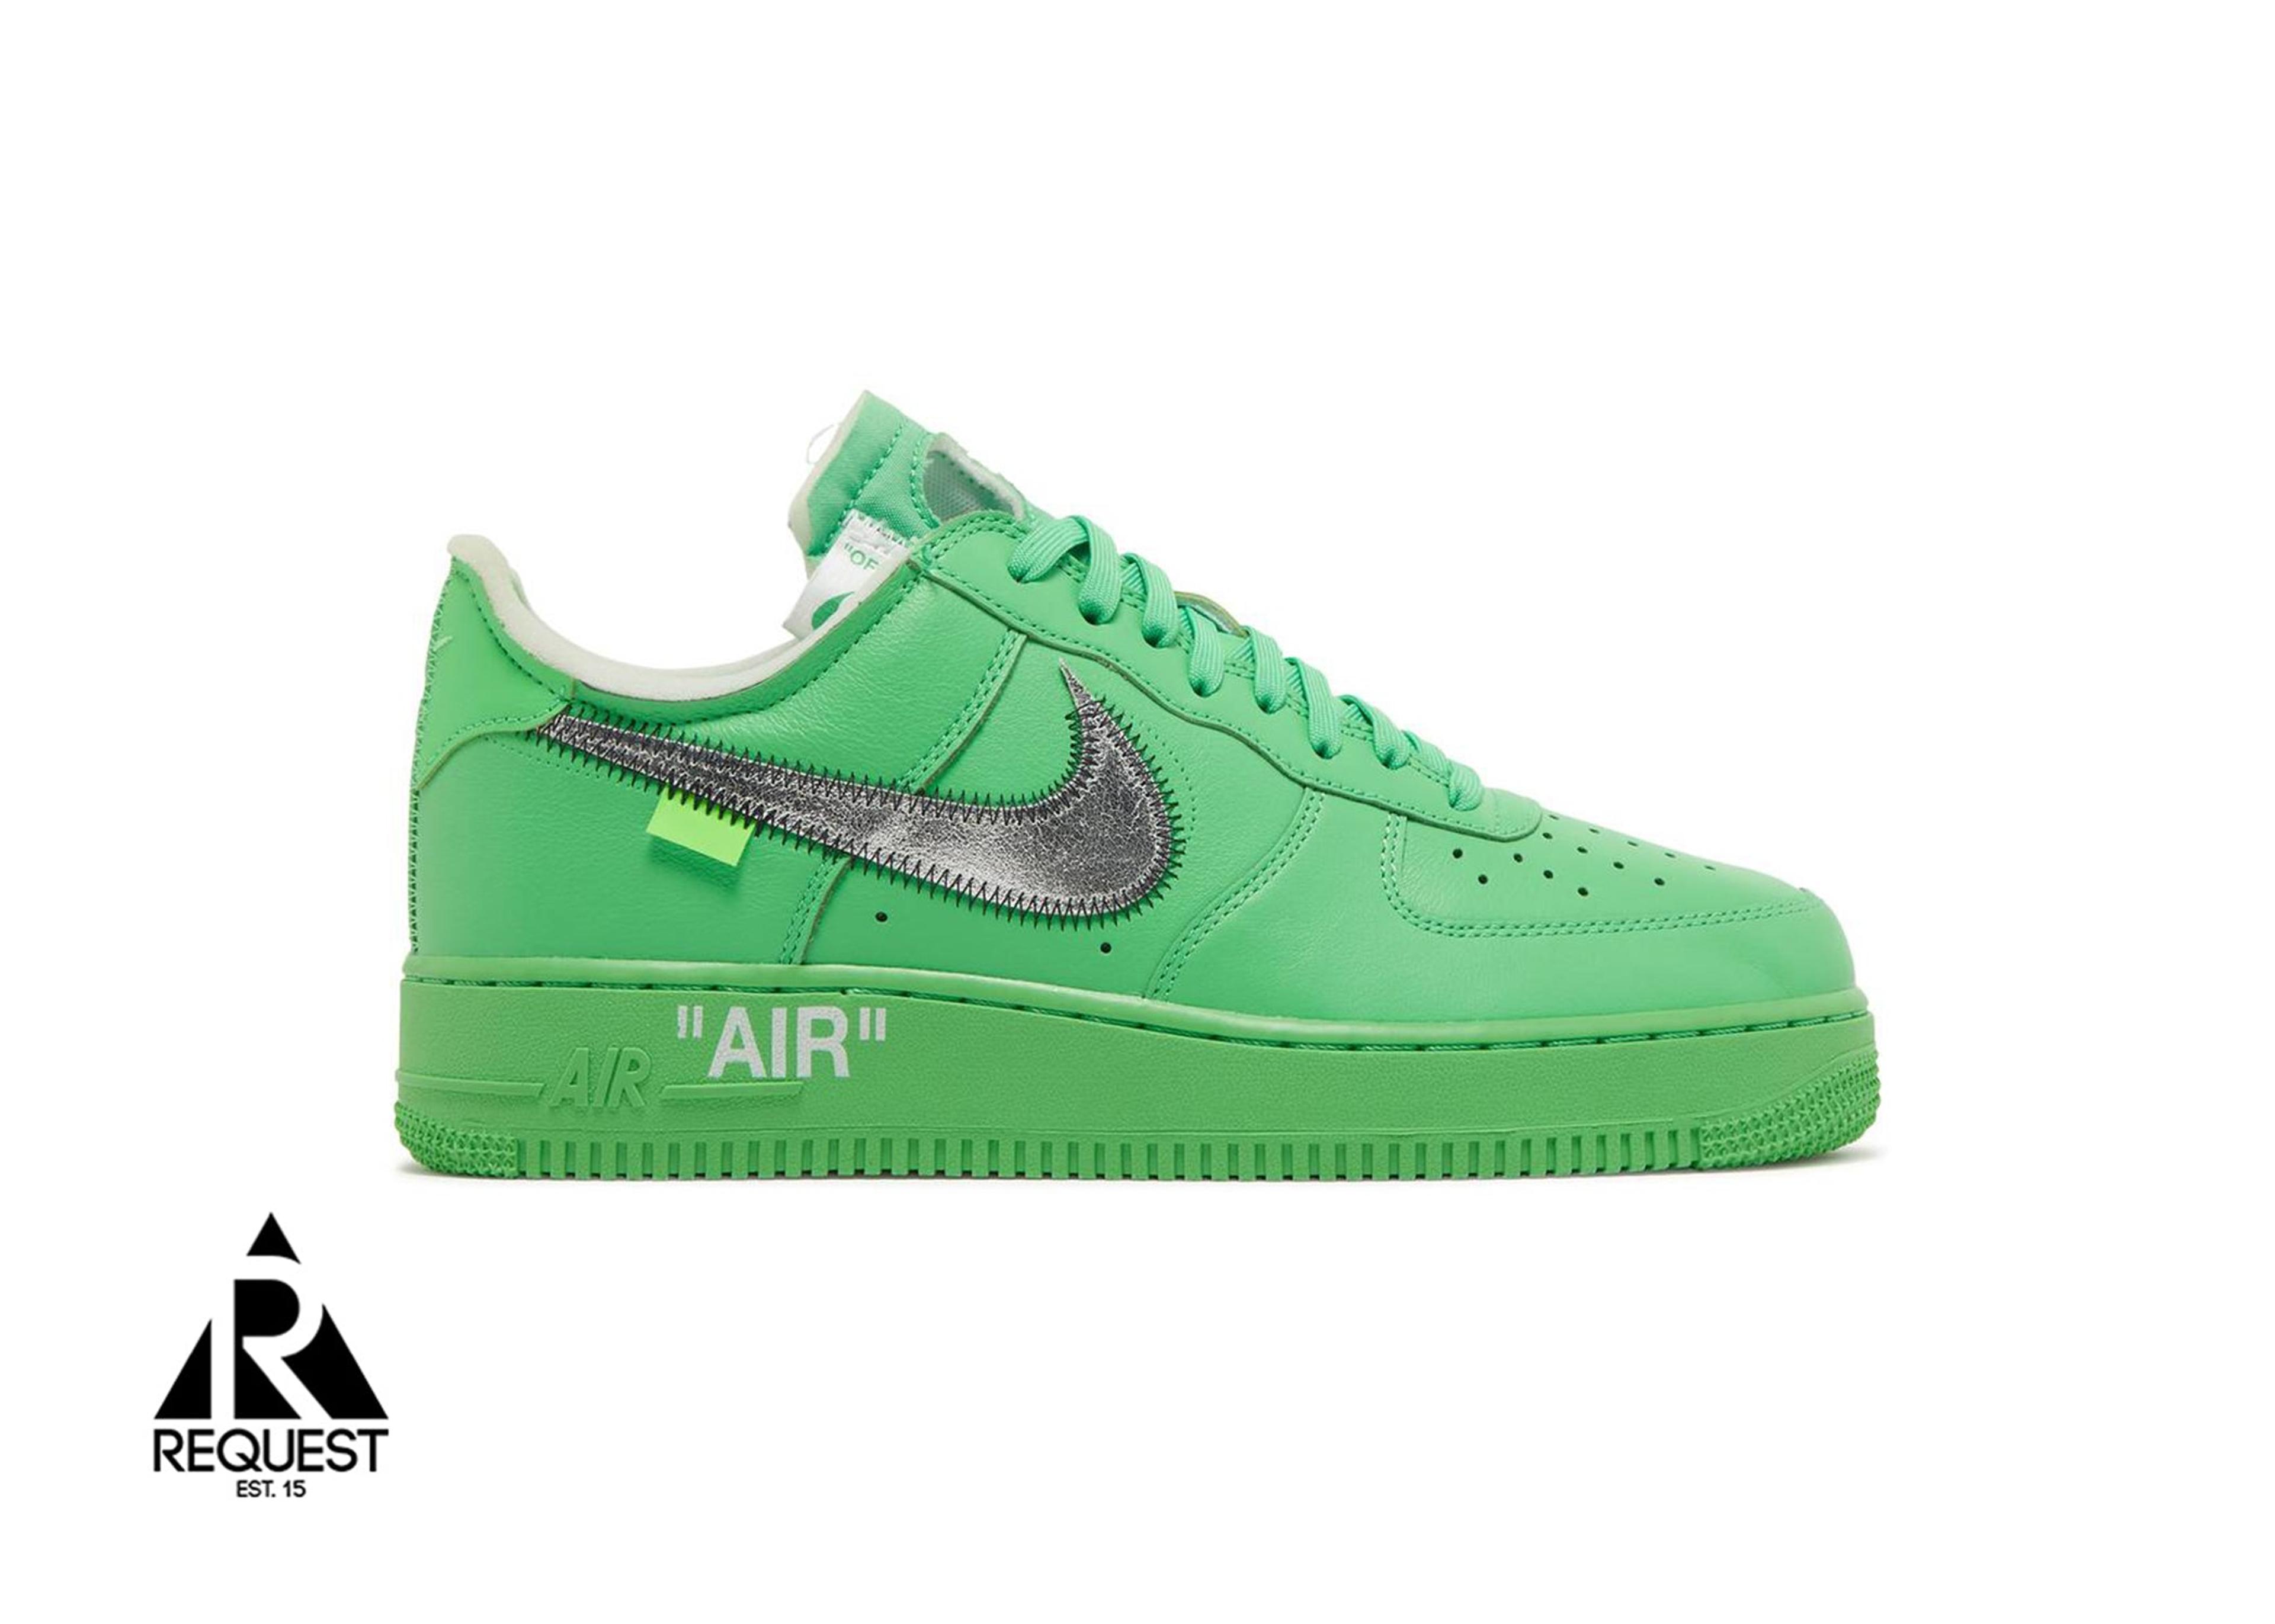 Nike Off White Air Force 1 Low "Brooklyn" / "Green Spark"